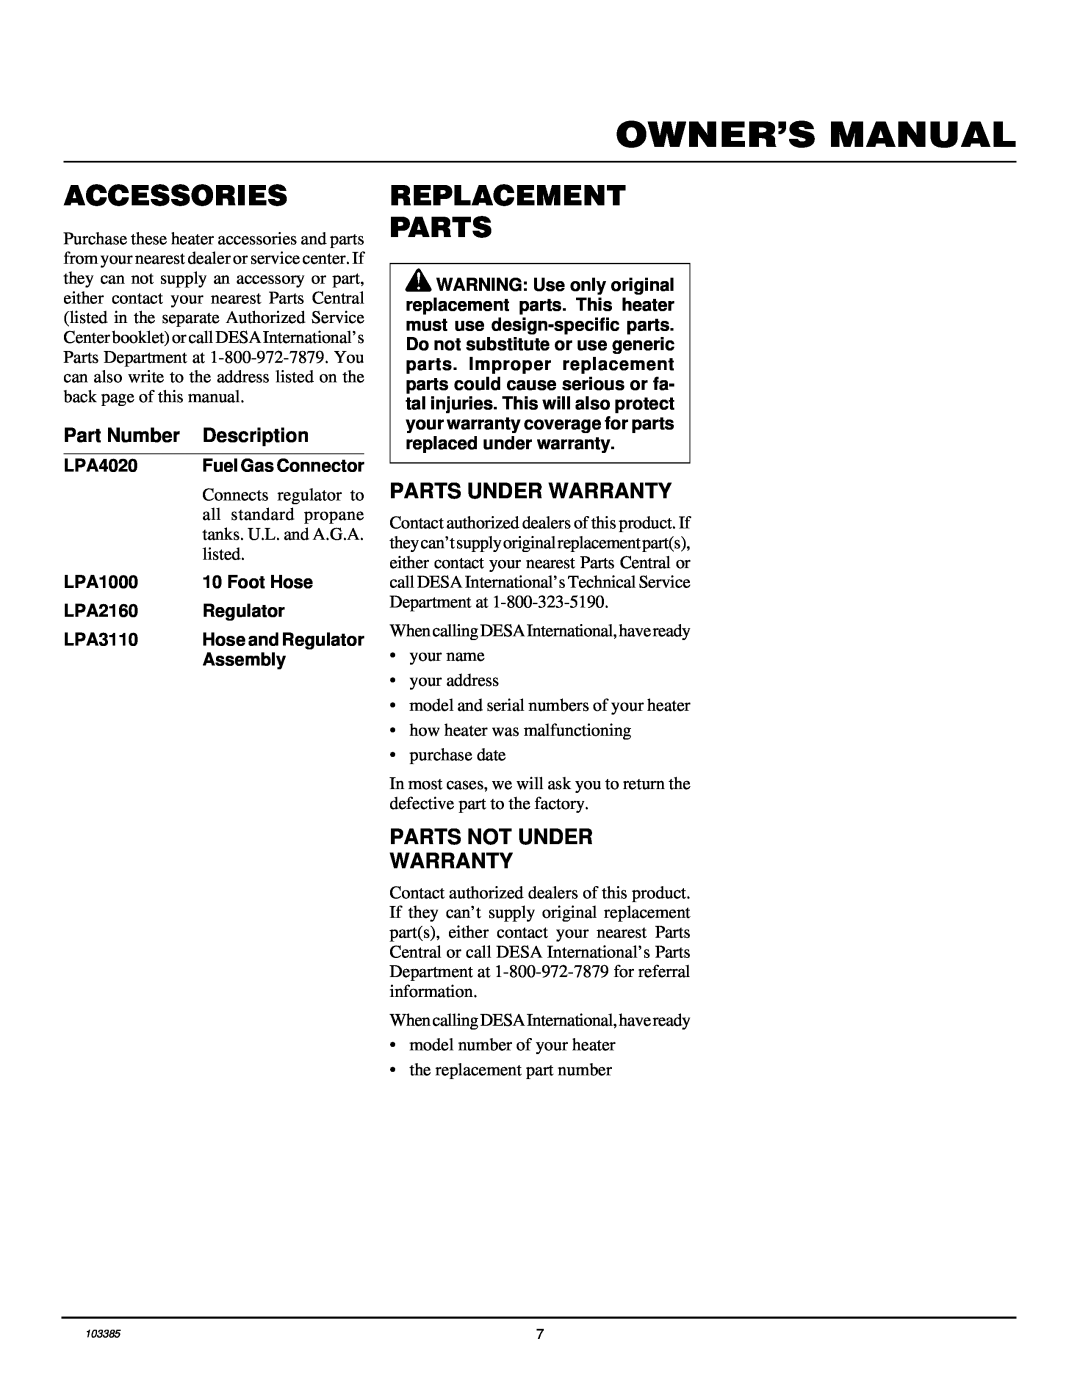 Desa RCP80V Accessories, Replacement Parts, Connects regulator to, all standard propane, tanks. U.L. and A.G.A, listed 